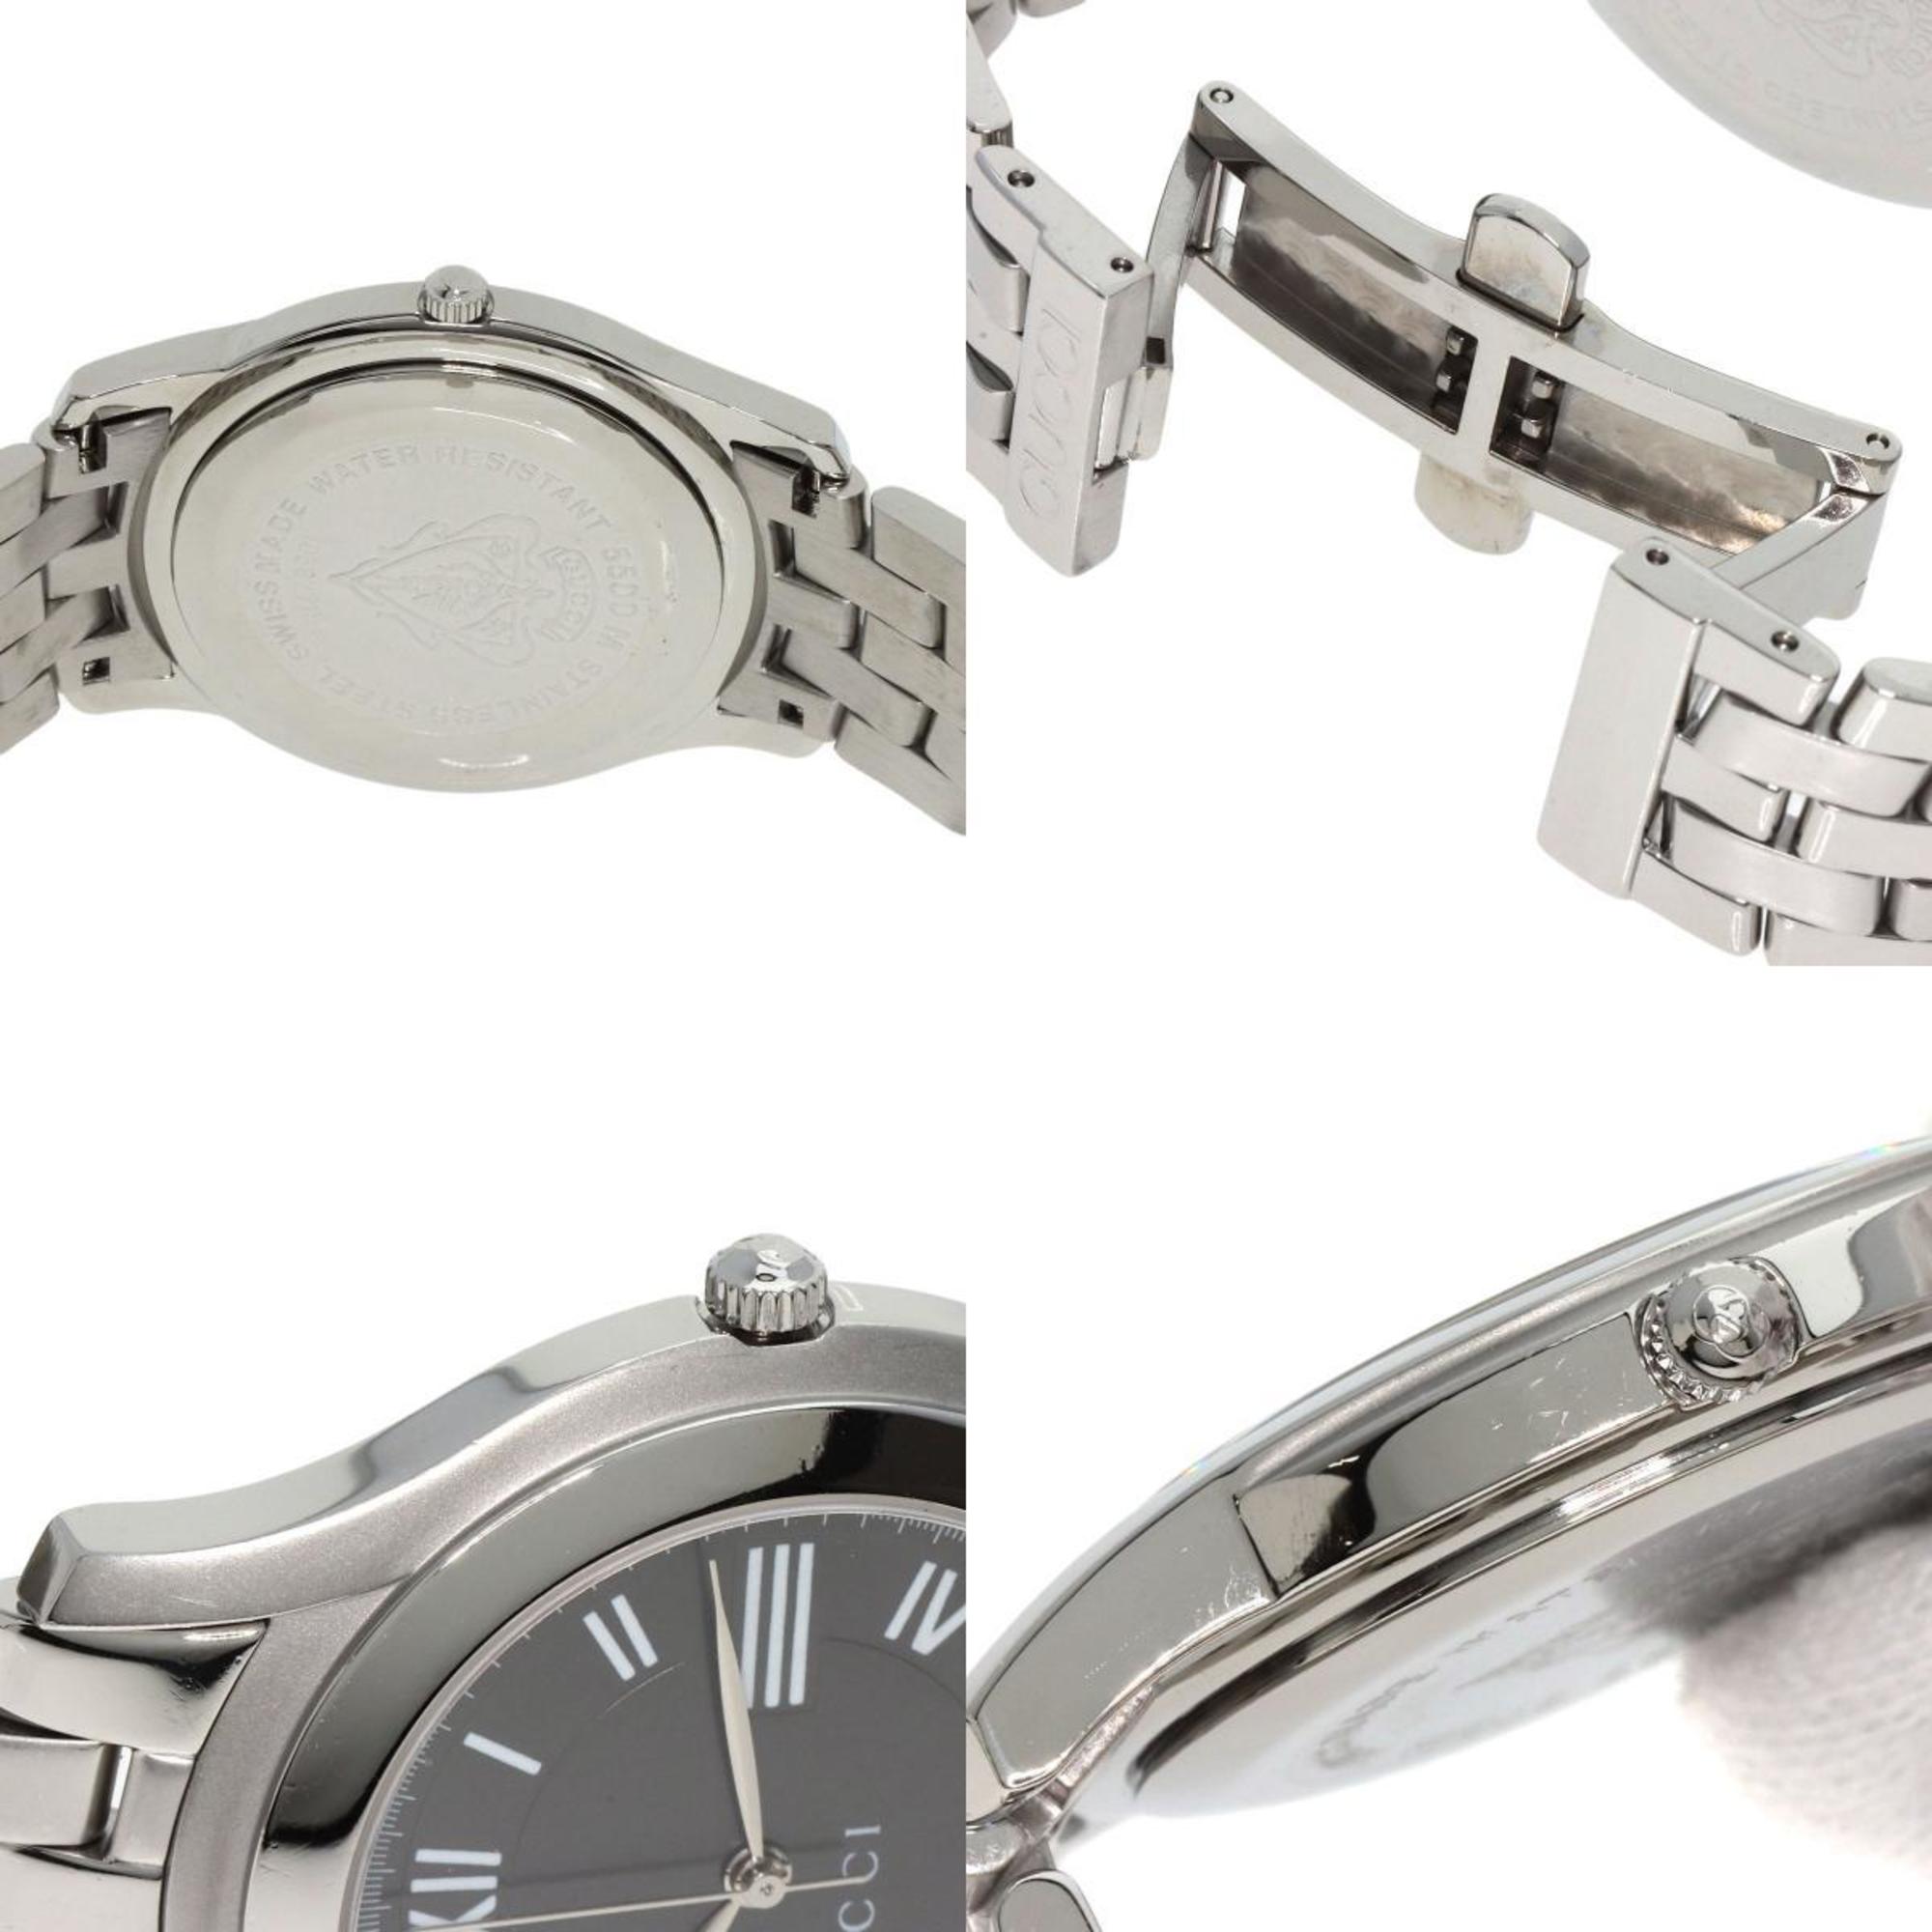 Gucci 5500M Watch Stainless Steel SS Men's GUCCI